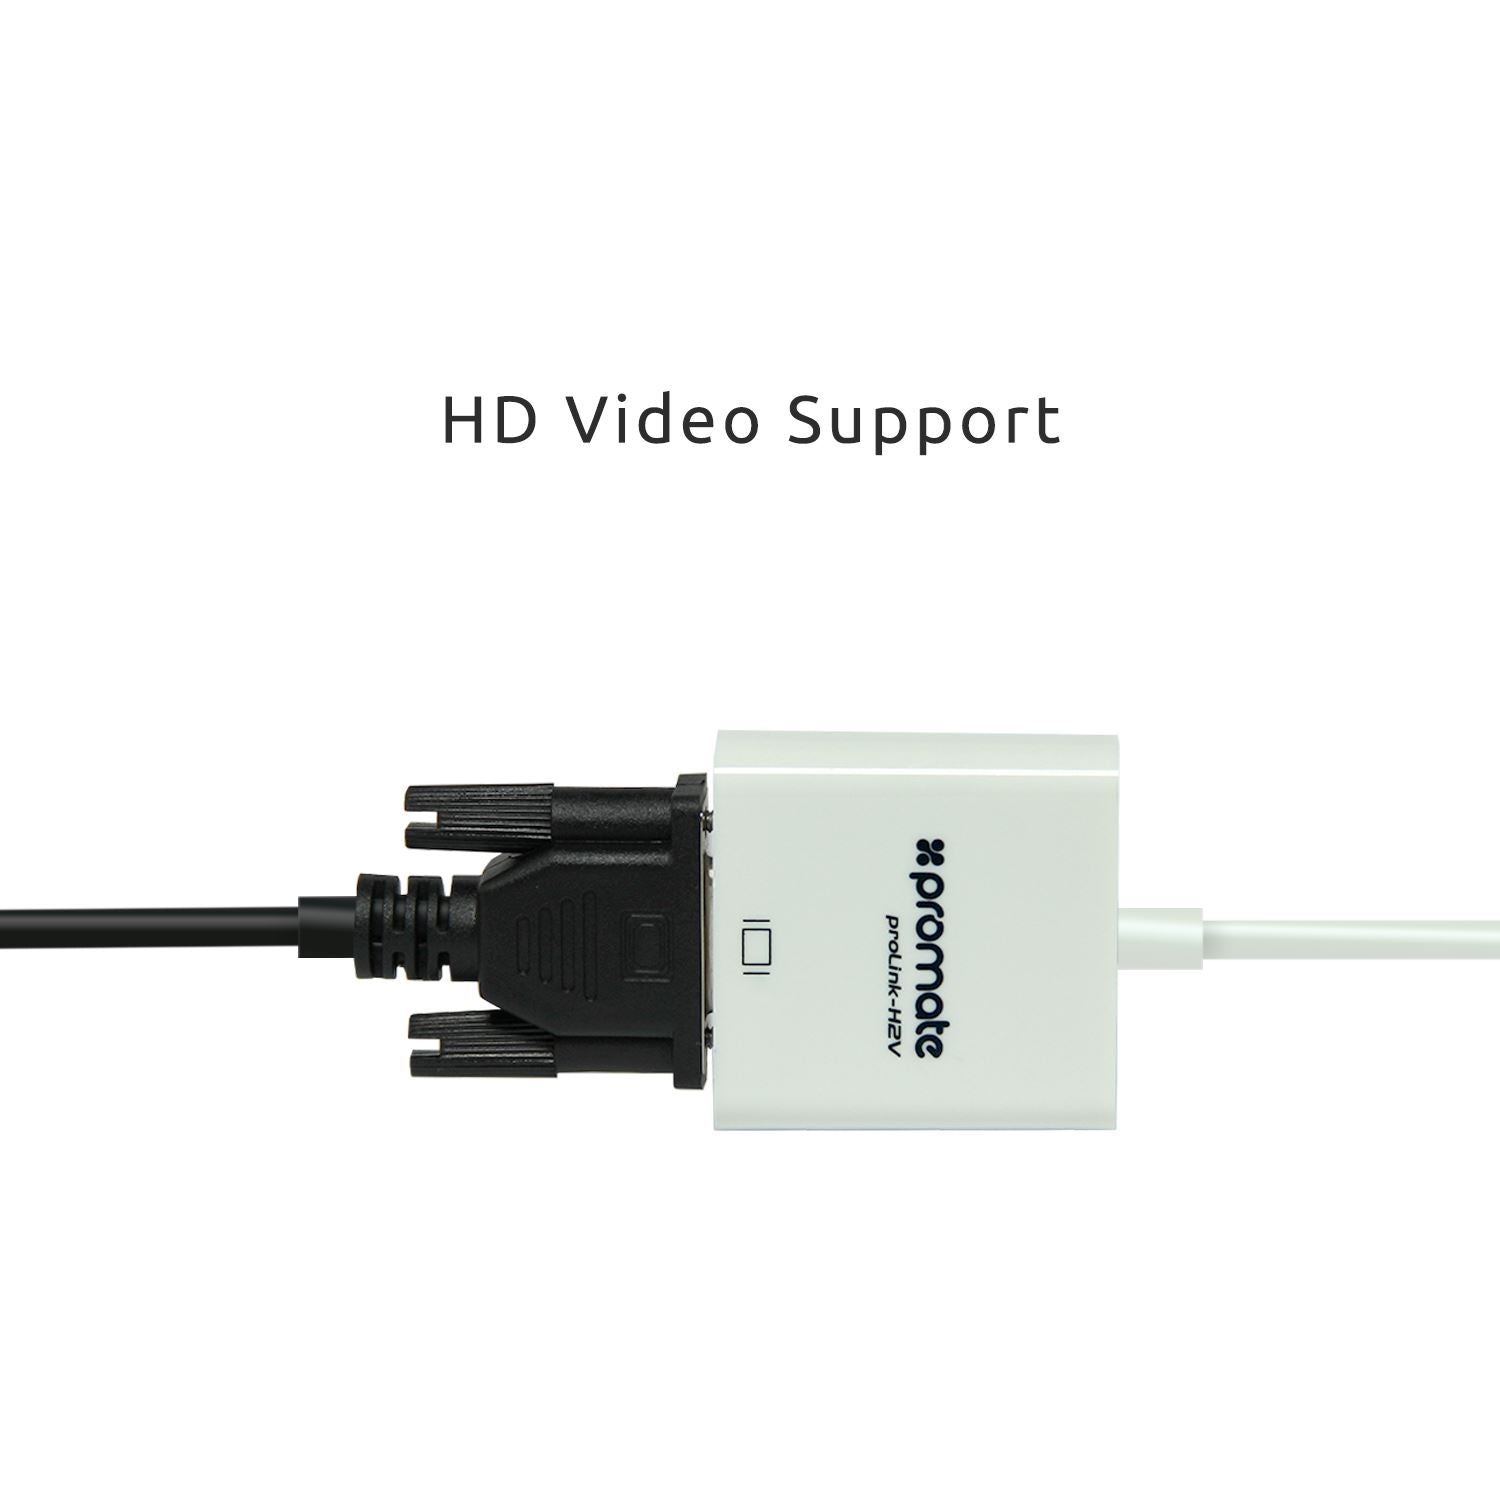 PROMATE_HDMI_(Male)_to_VGA_(Female)_Display_Adaptor_Kit._Supports_up_to_1920x1080@60Hz._Gold-Plated_HDMI_Connector._Supports_both_Windows_&_Mac._White_Colour. 1721